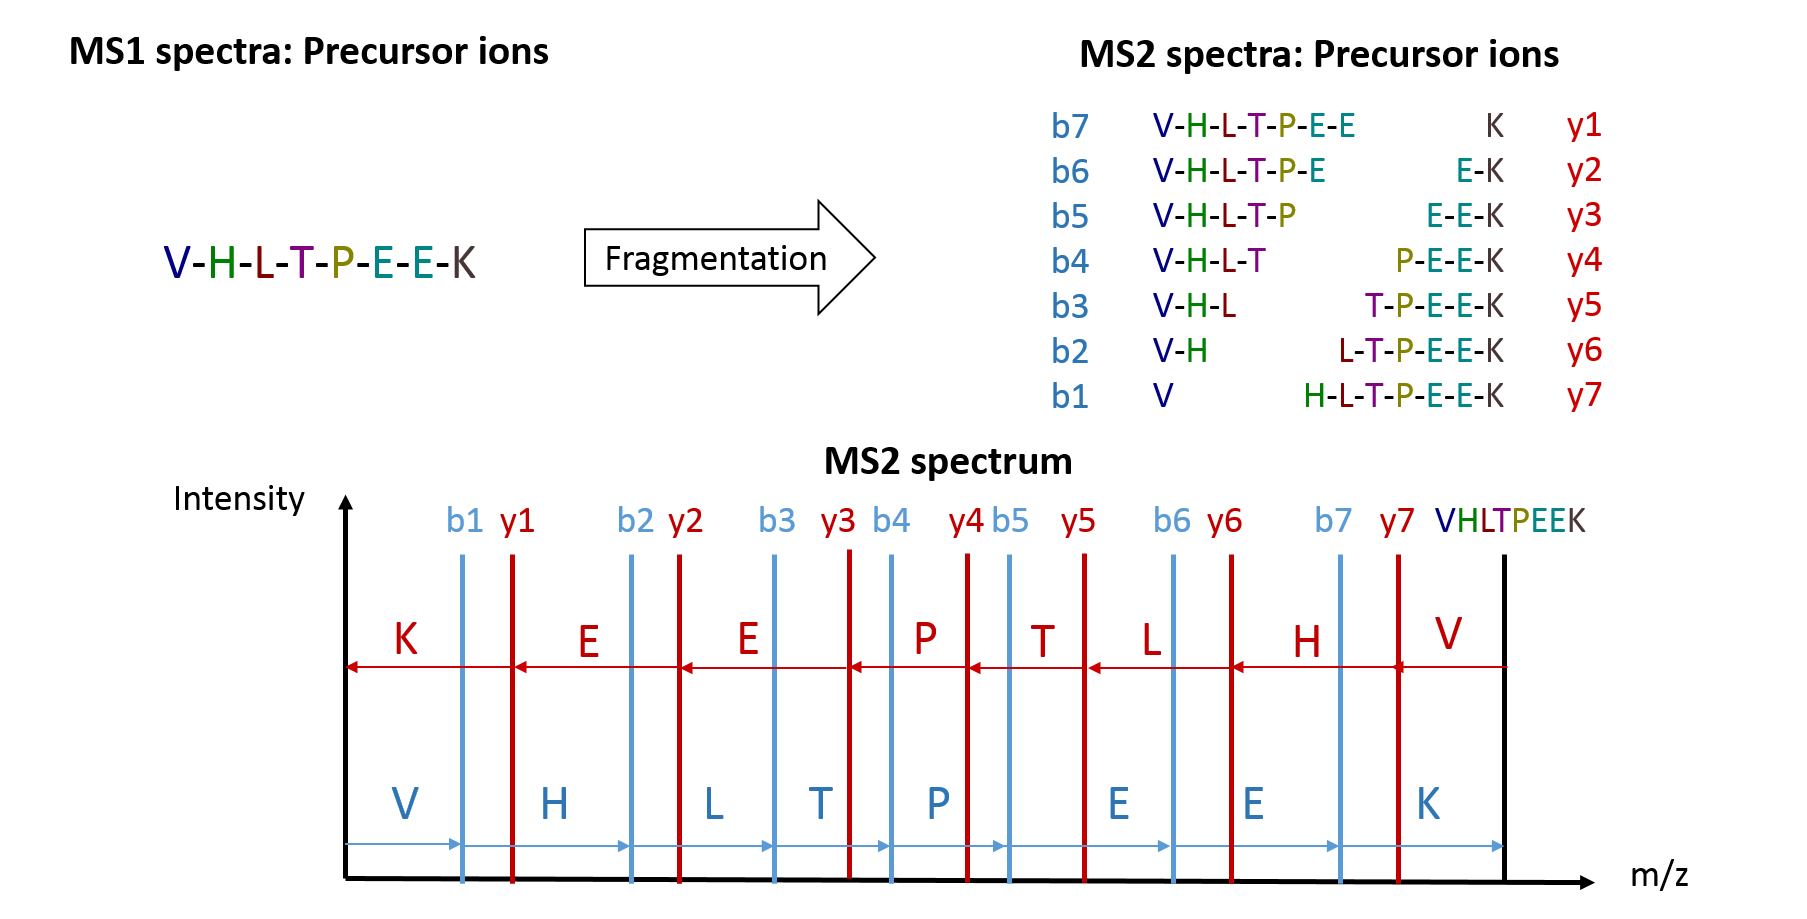 MS1 spectra with precursor ions are fragmented, an example sequence is given. On the right we see different fragments for each potential cut site in the sequence. Below the MS2 spectra show numerous lines which sum up to the m/z of the entire sequence and have individual peaks for each of the individual subsequences of the protein.